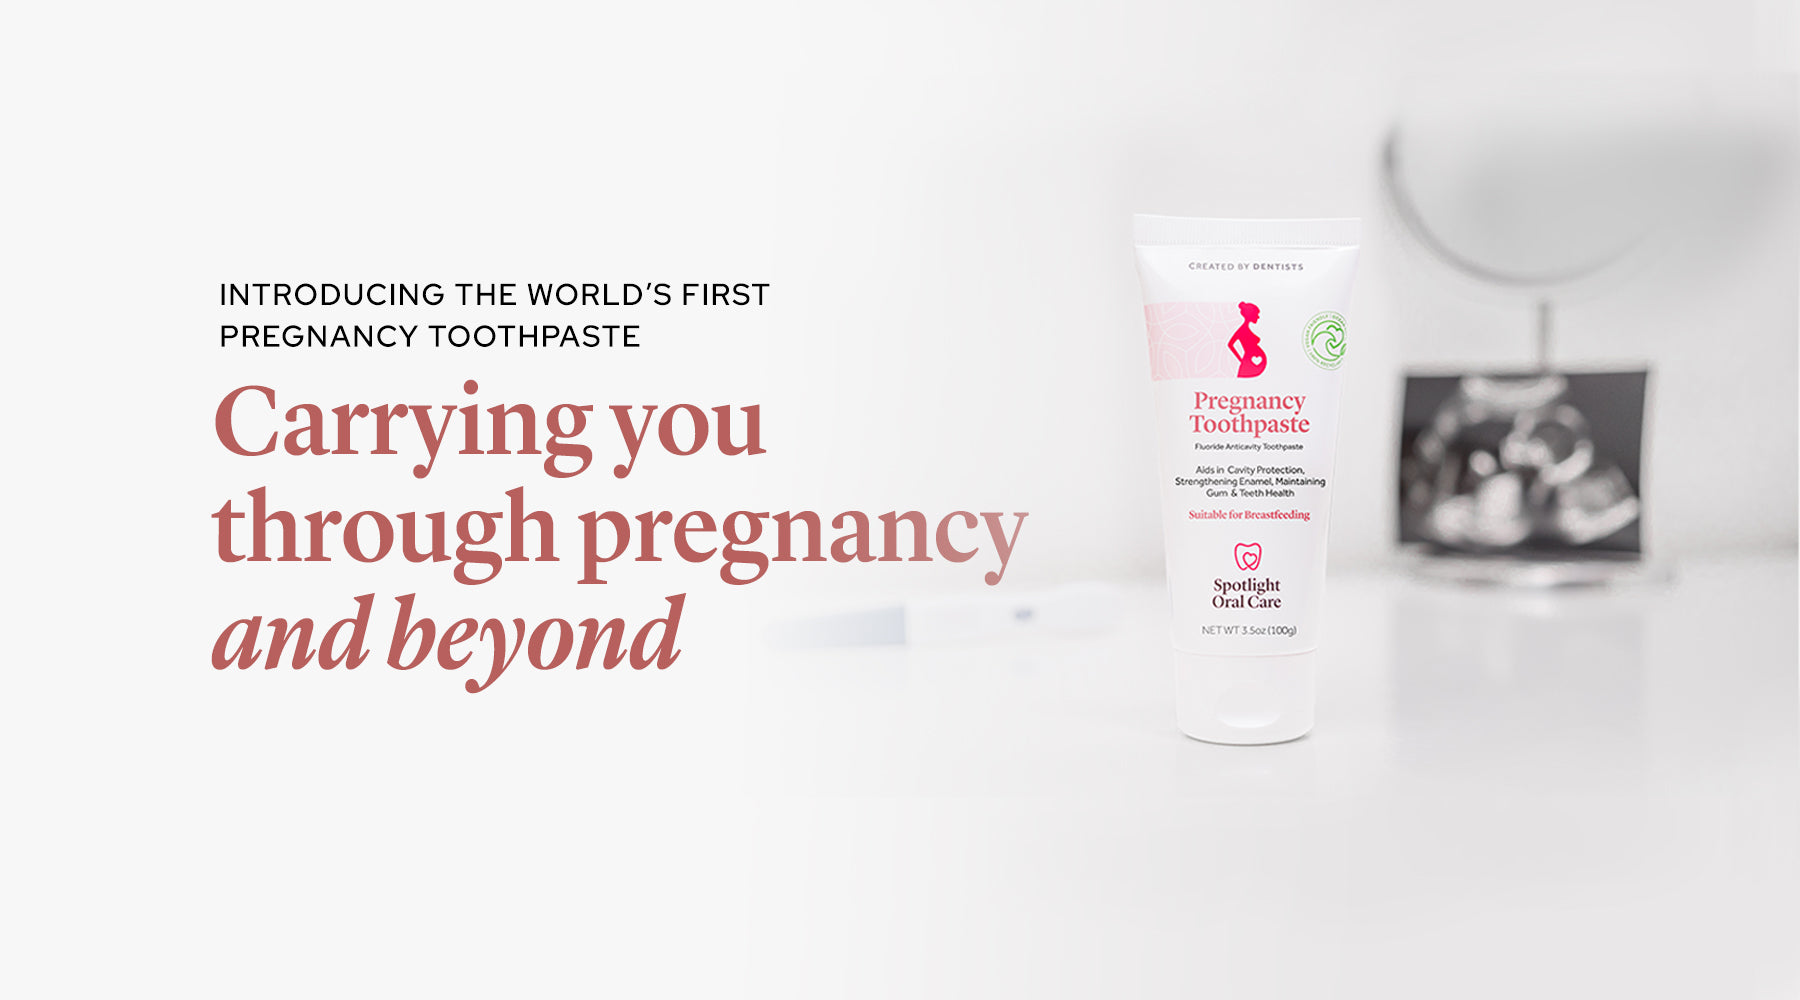 Brushing for Two: Pregnancy & Your Oral Health